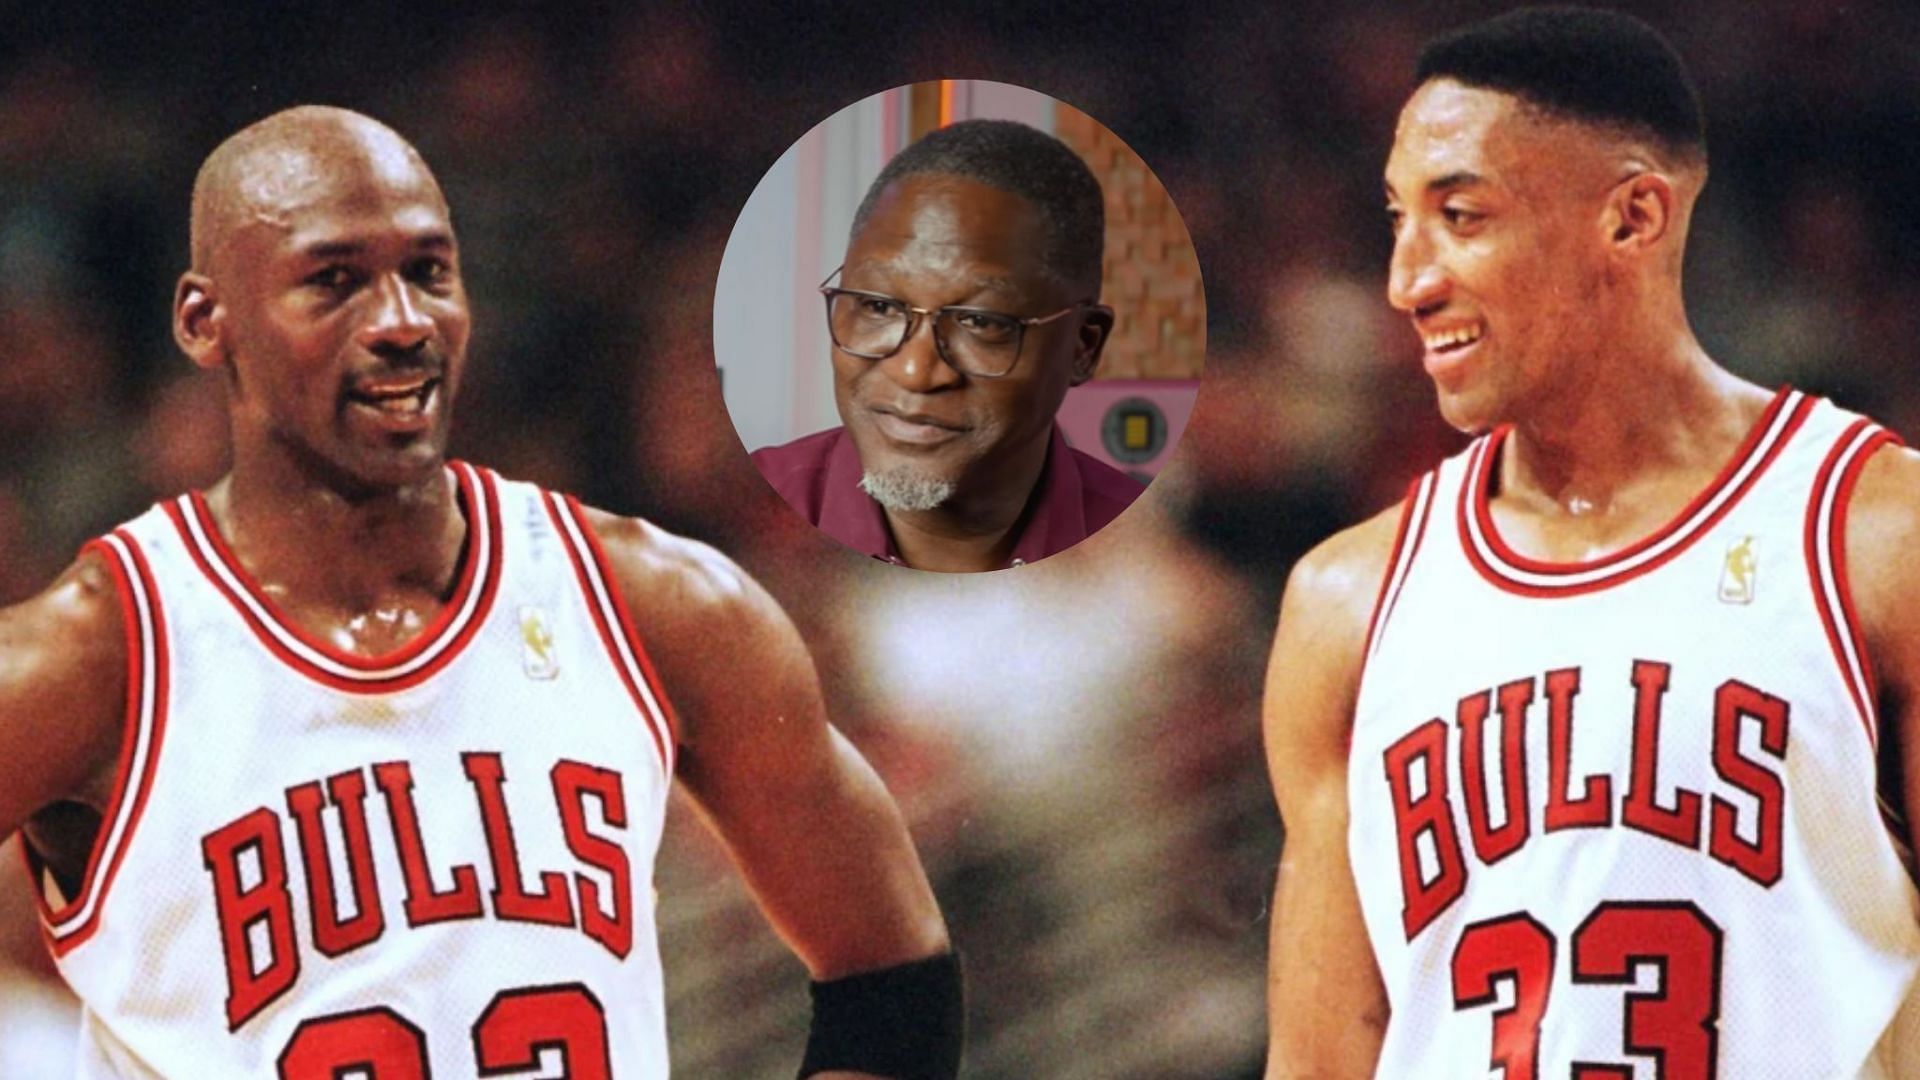 Dominique Wilkins has something to say about the Jordan-Pippen beef